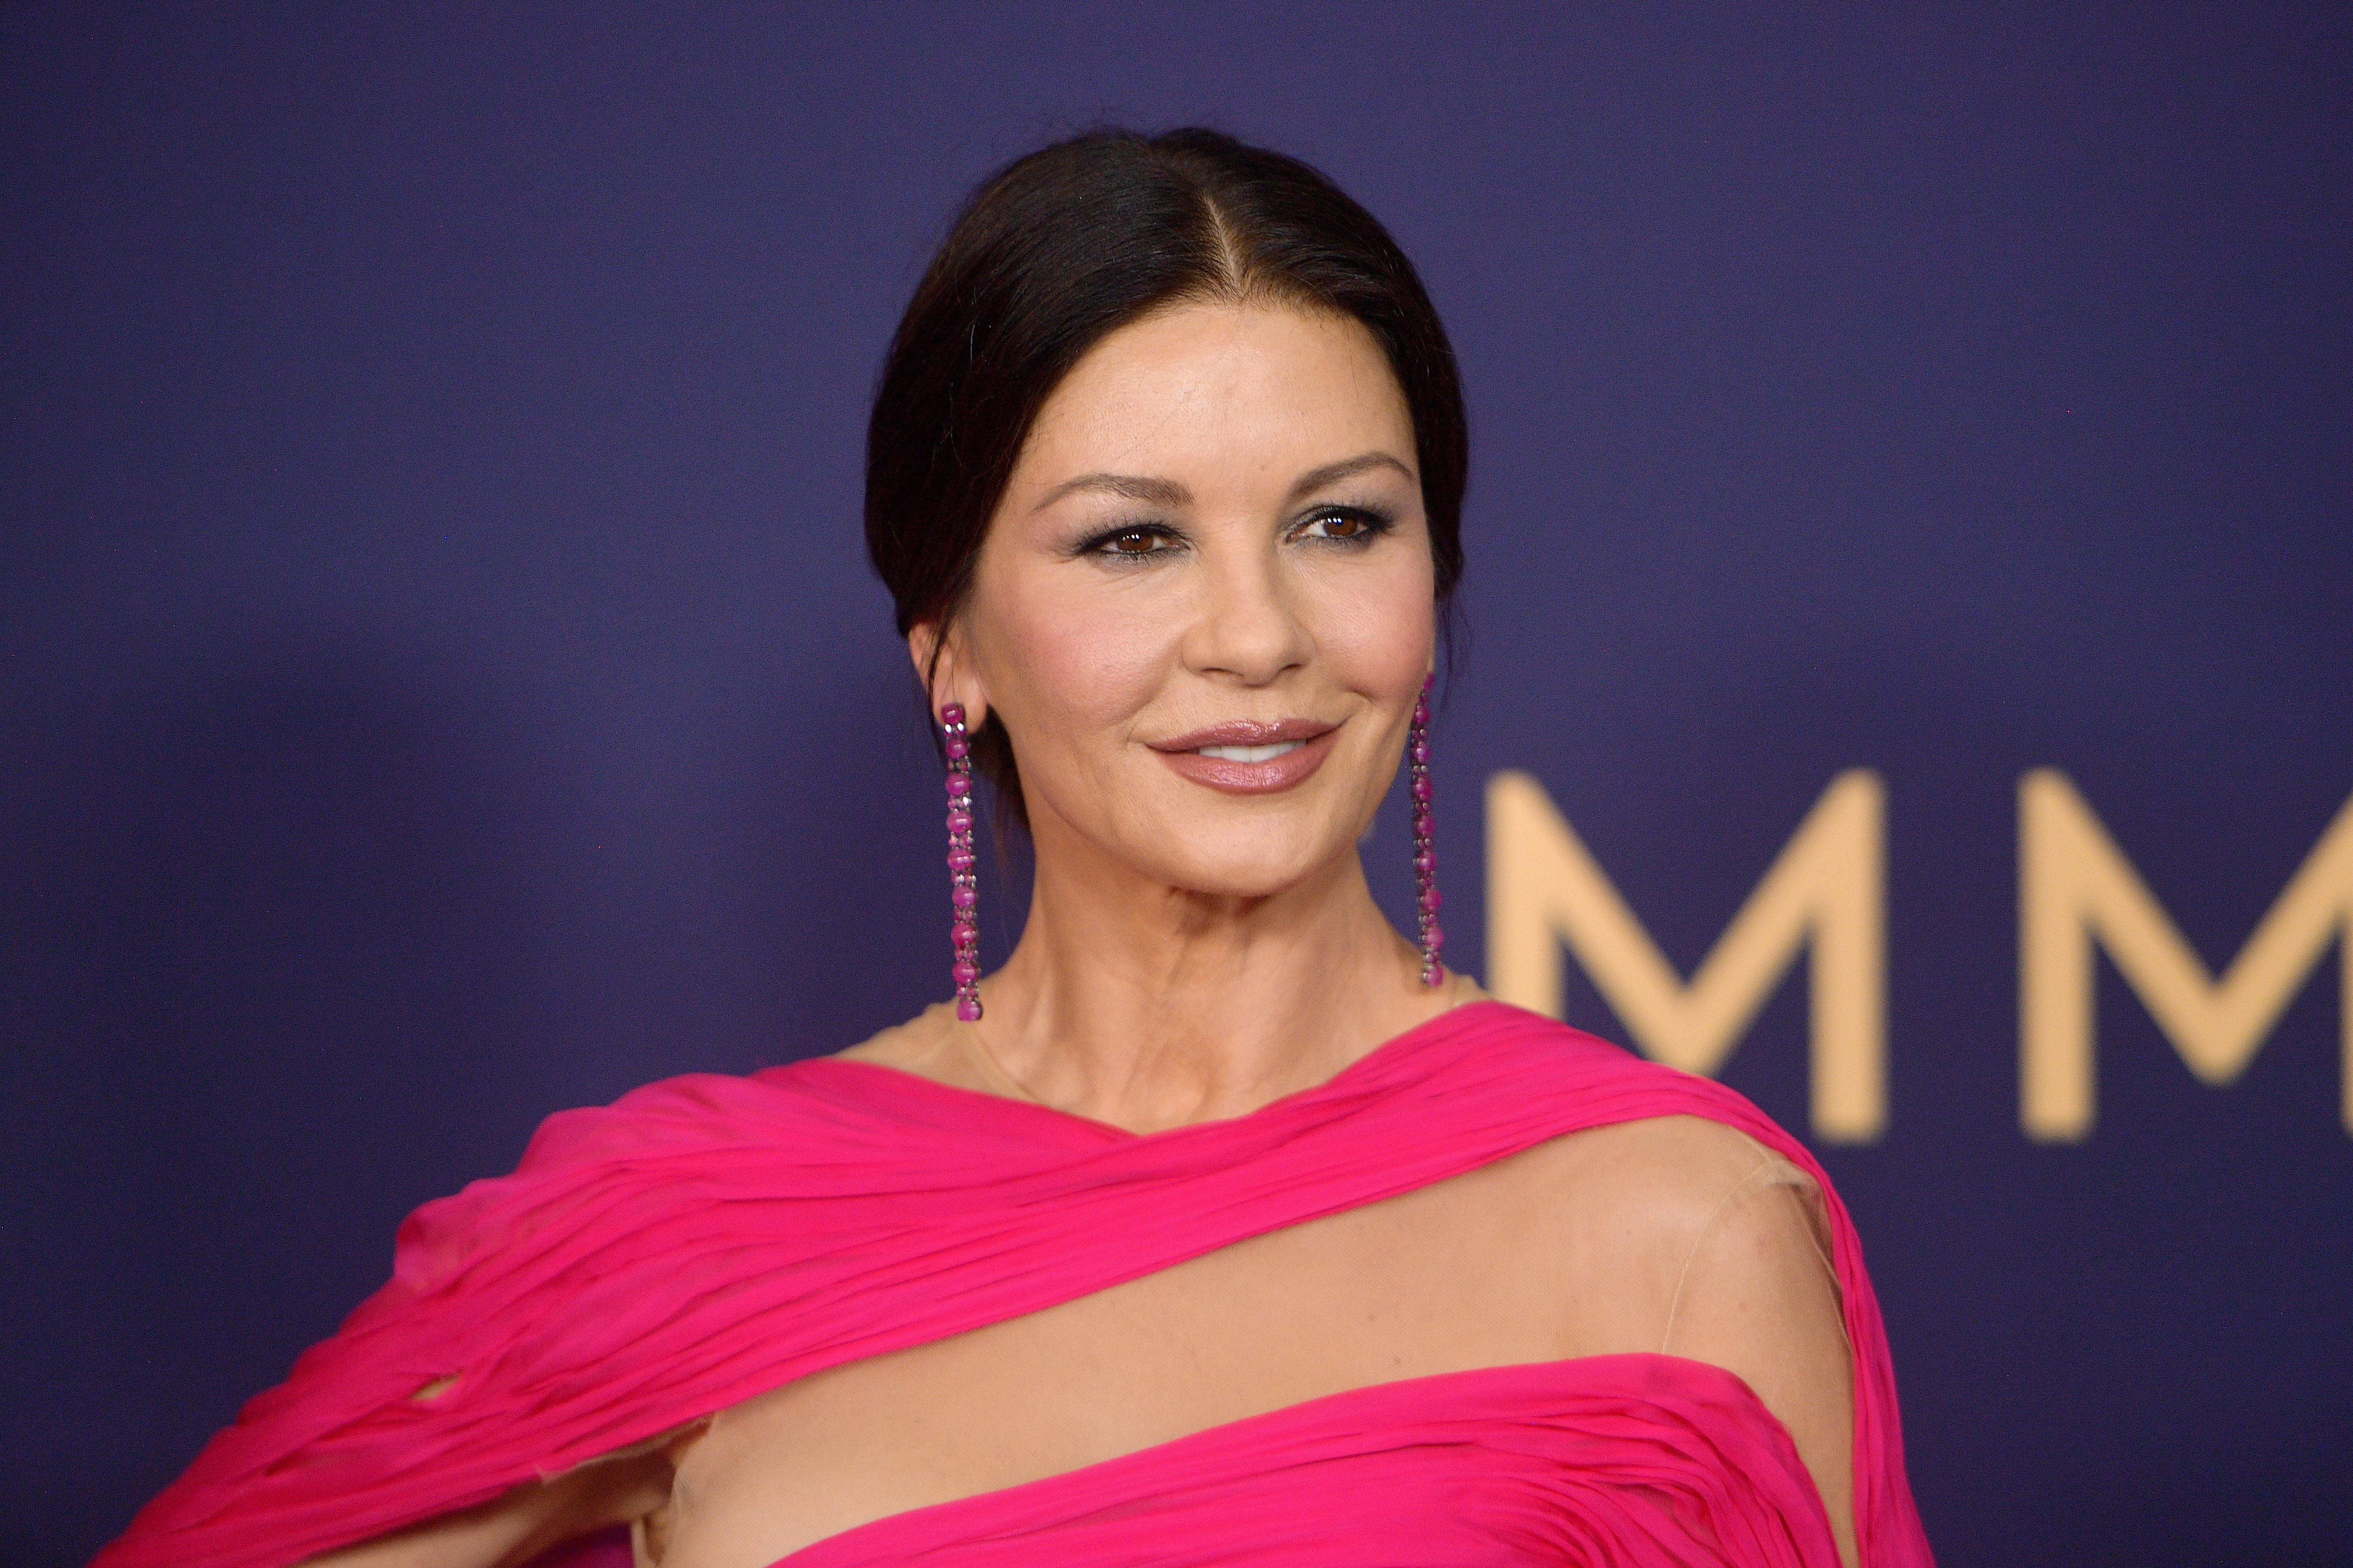 Catherine Zeta-Jones attends the 71st Emmy Awards at Microsoft Theater on September 22, 2019. | Photo: Getty Images